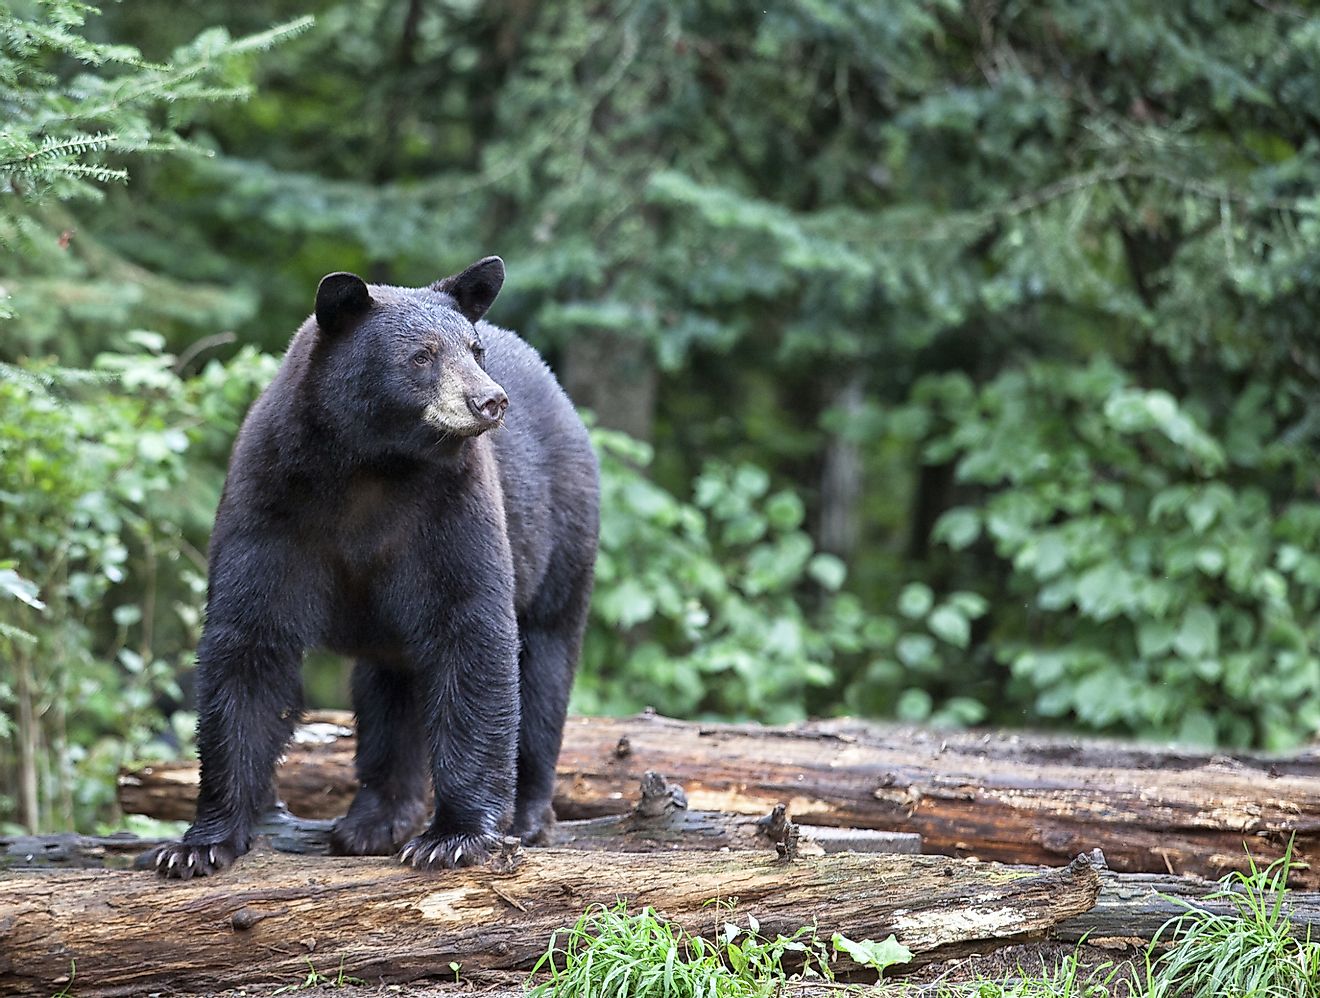 The short tails, ability to run on all fours and stand up, and omnivorous diets of the American Black Bear have often been likened to the abilities of humans.